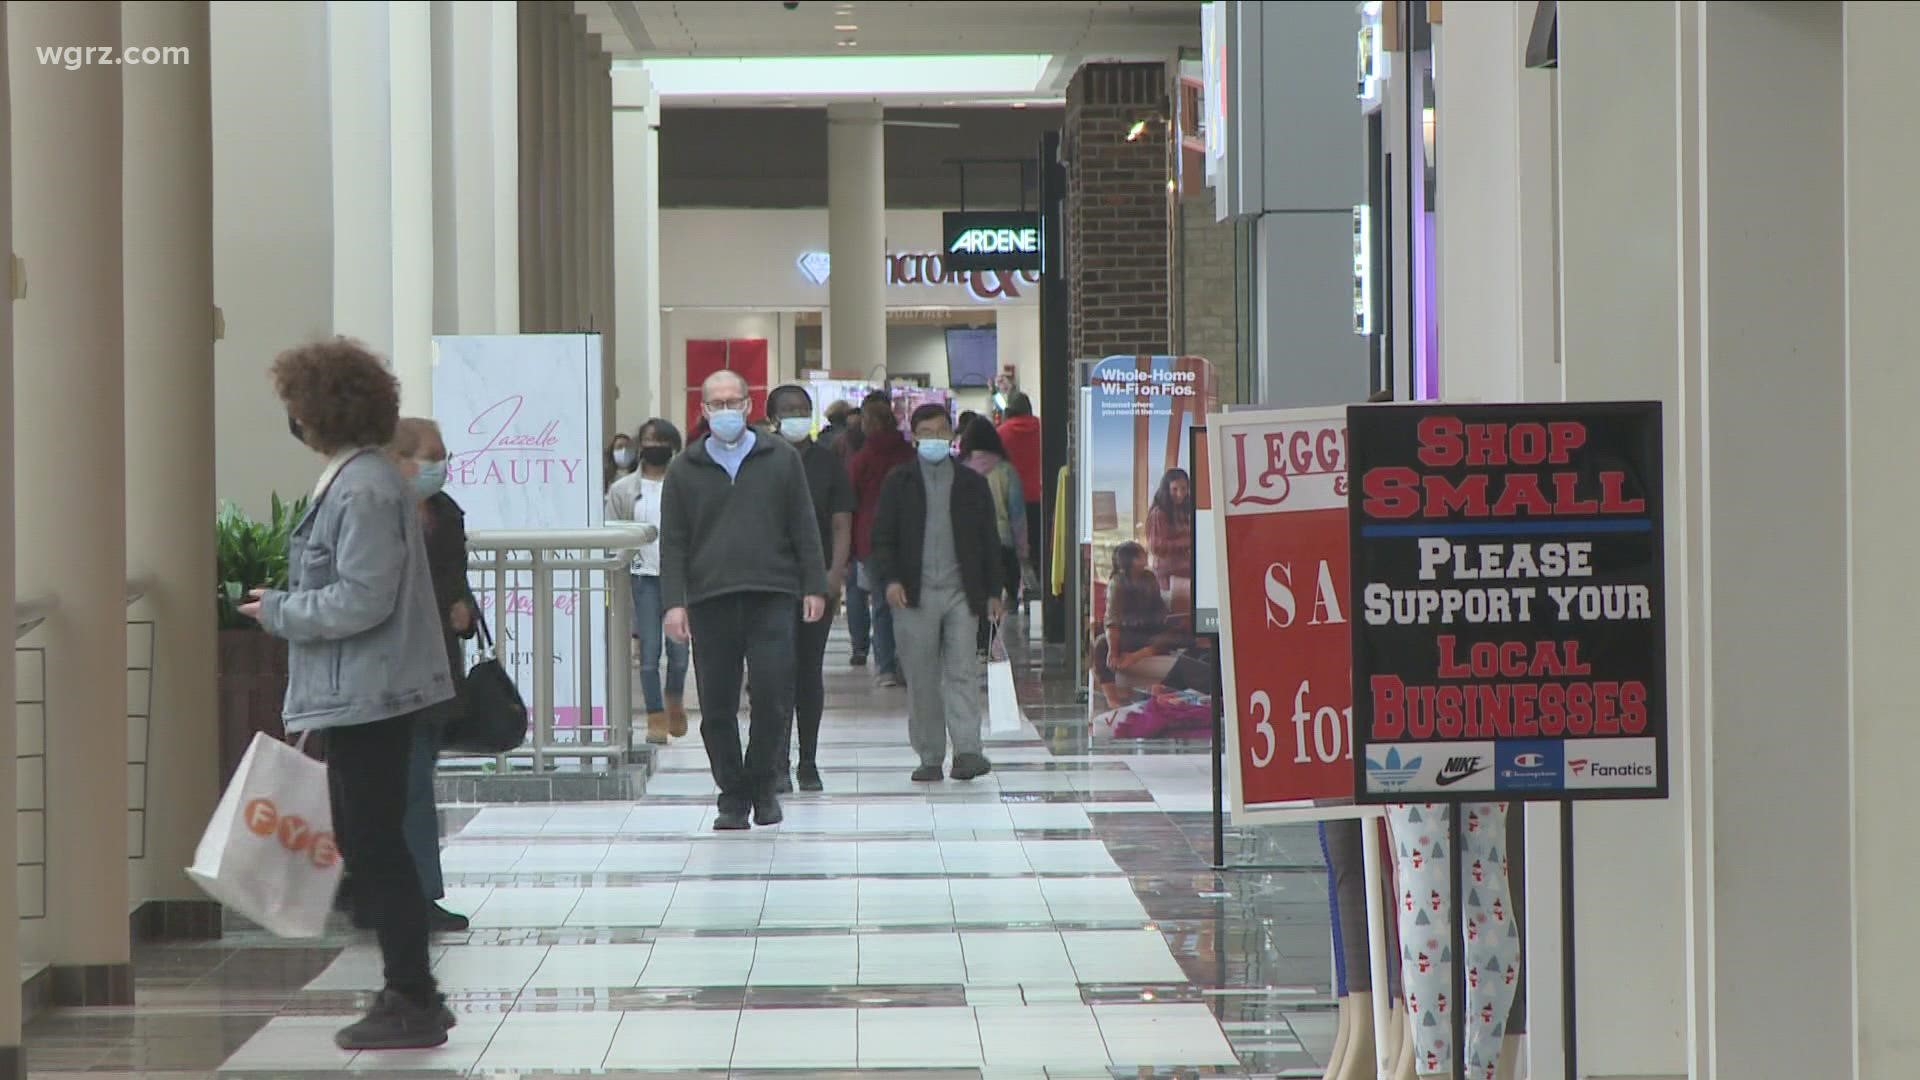 With 23 shopping days left in the Christmas season, the Galleria along with Cheektowaga Police are addressing a new round of concerns about security at the mall.